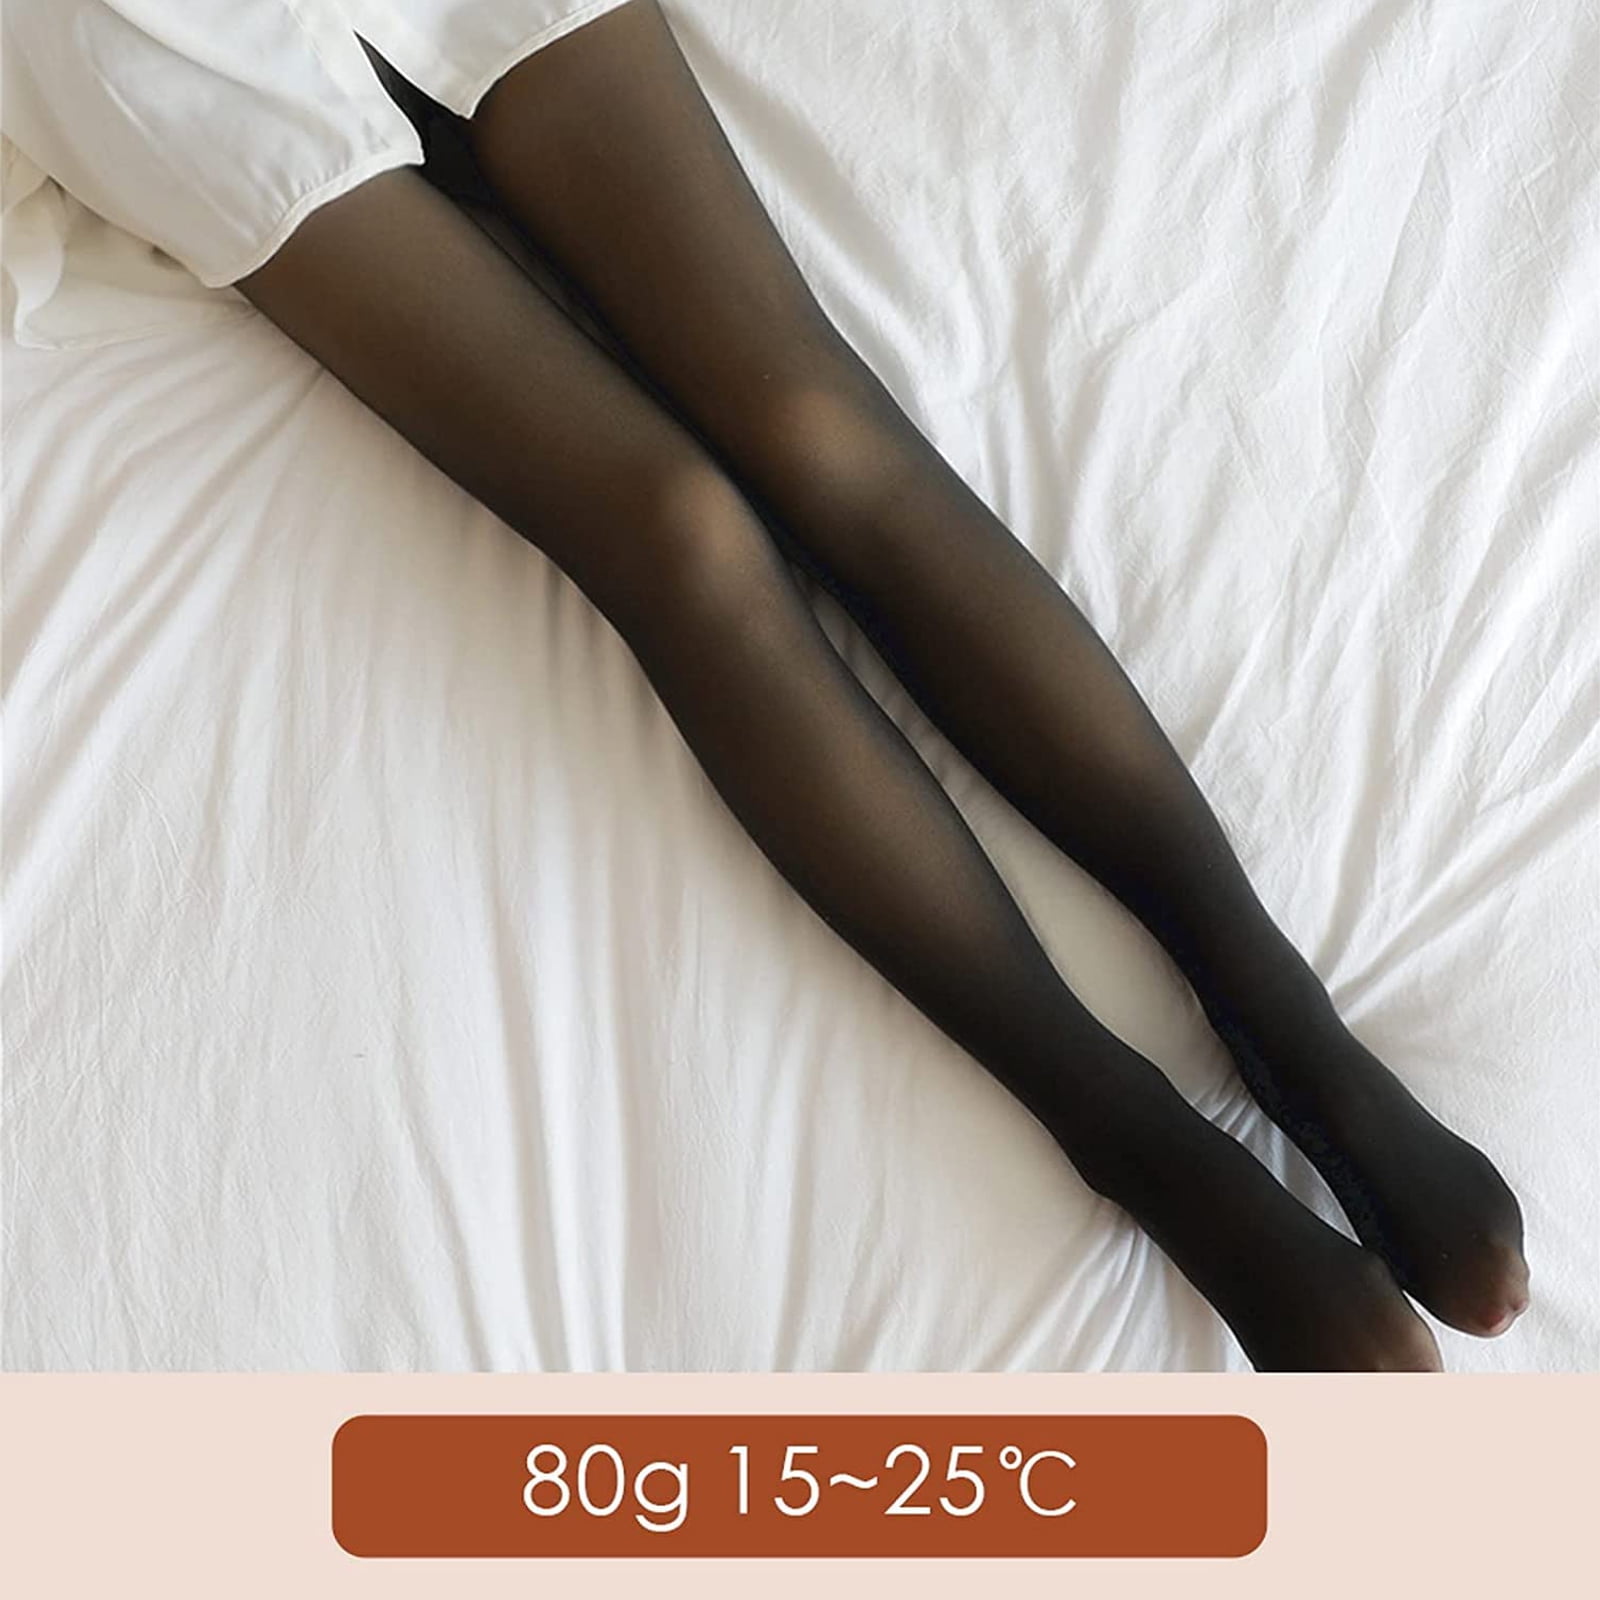 Fleece Lined Tights Women Fake Translucent Nude Tights Leggings Winter Warm  Plush Lined Elastic Tights (80g, Black A+B)